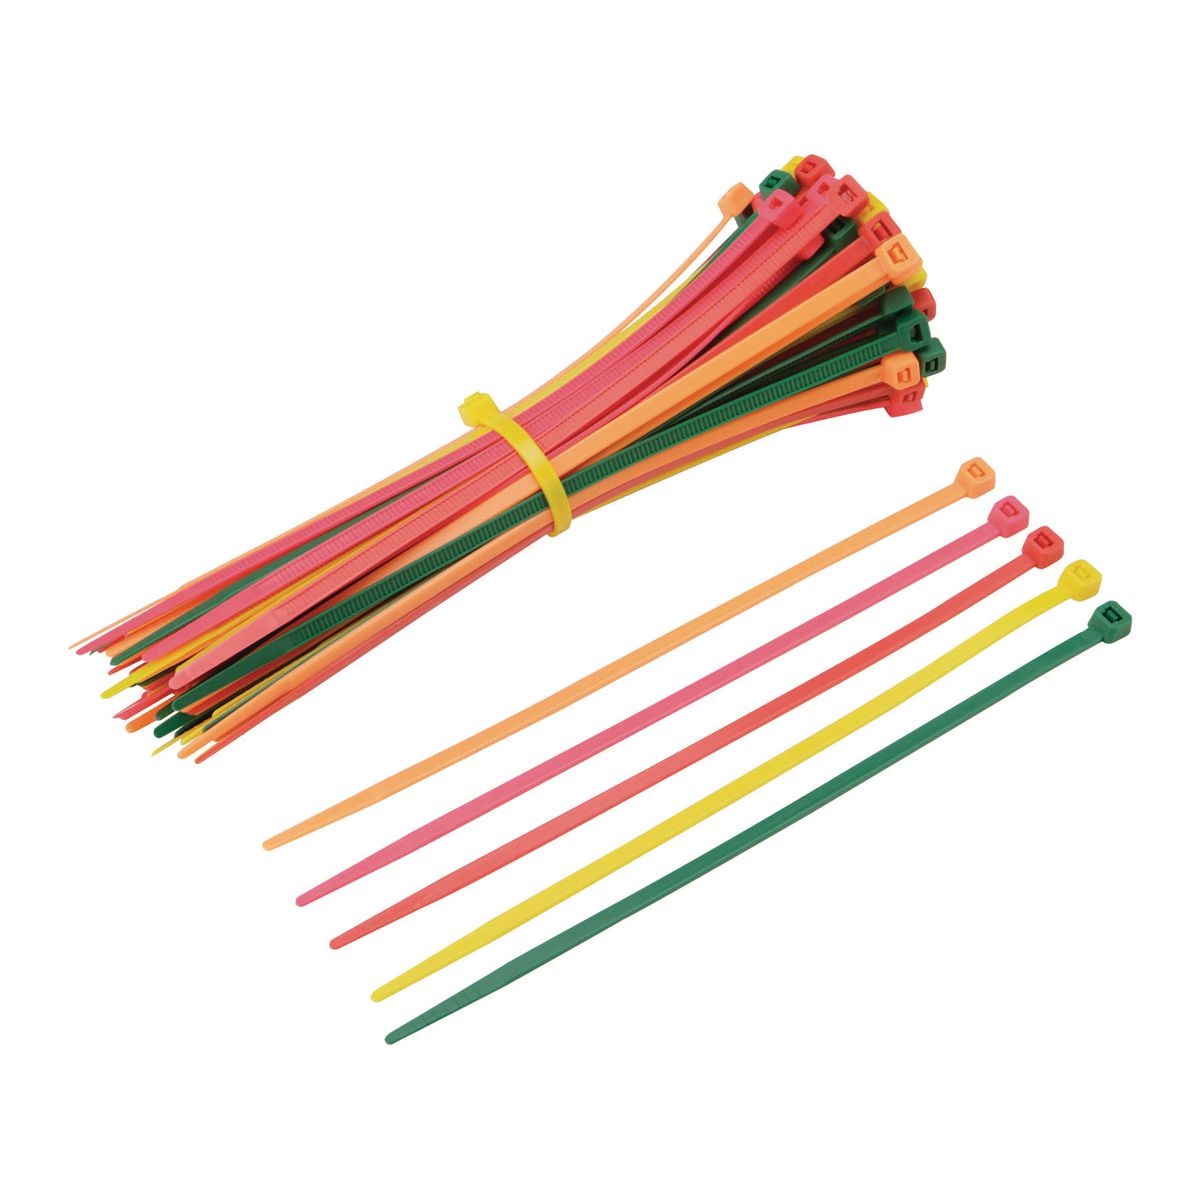 STOREHOUSE 8 in. Fluorescent Cable Ties 100 Pk - Item 98727 / 60275 / 69415